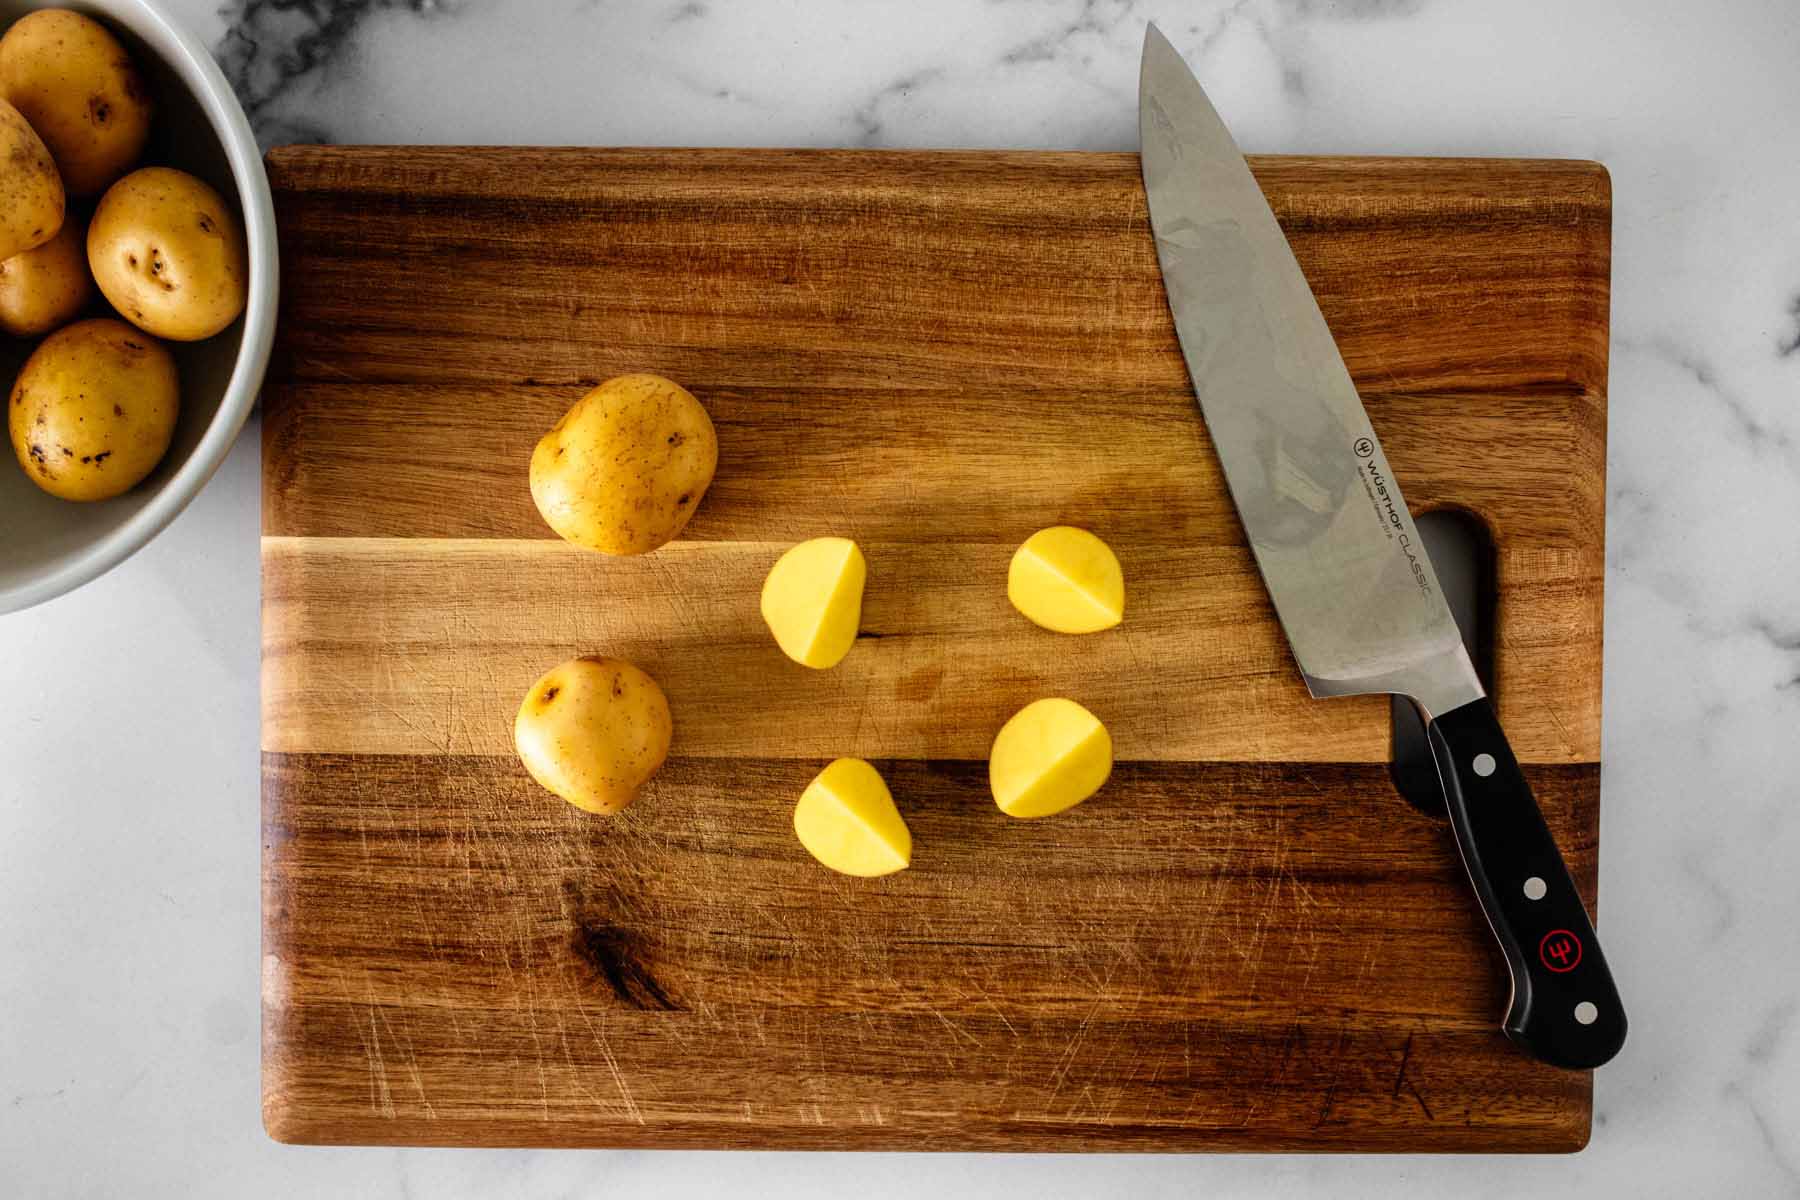 Chop potatoes with a chef's knife on a wooden cutting board.